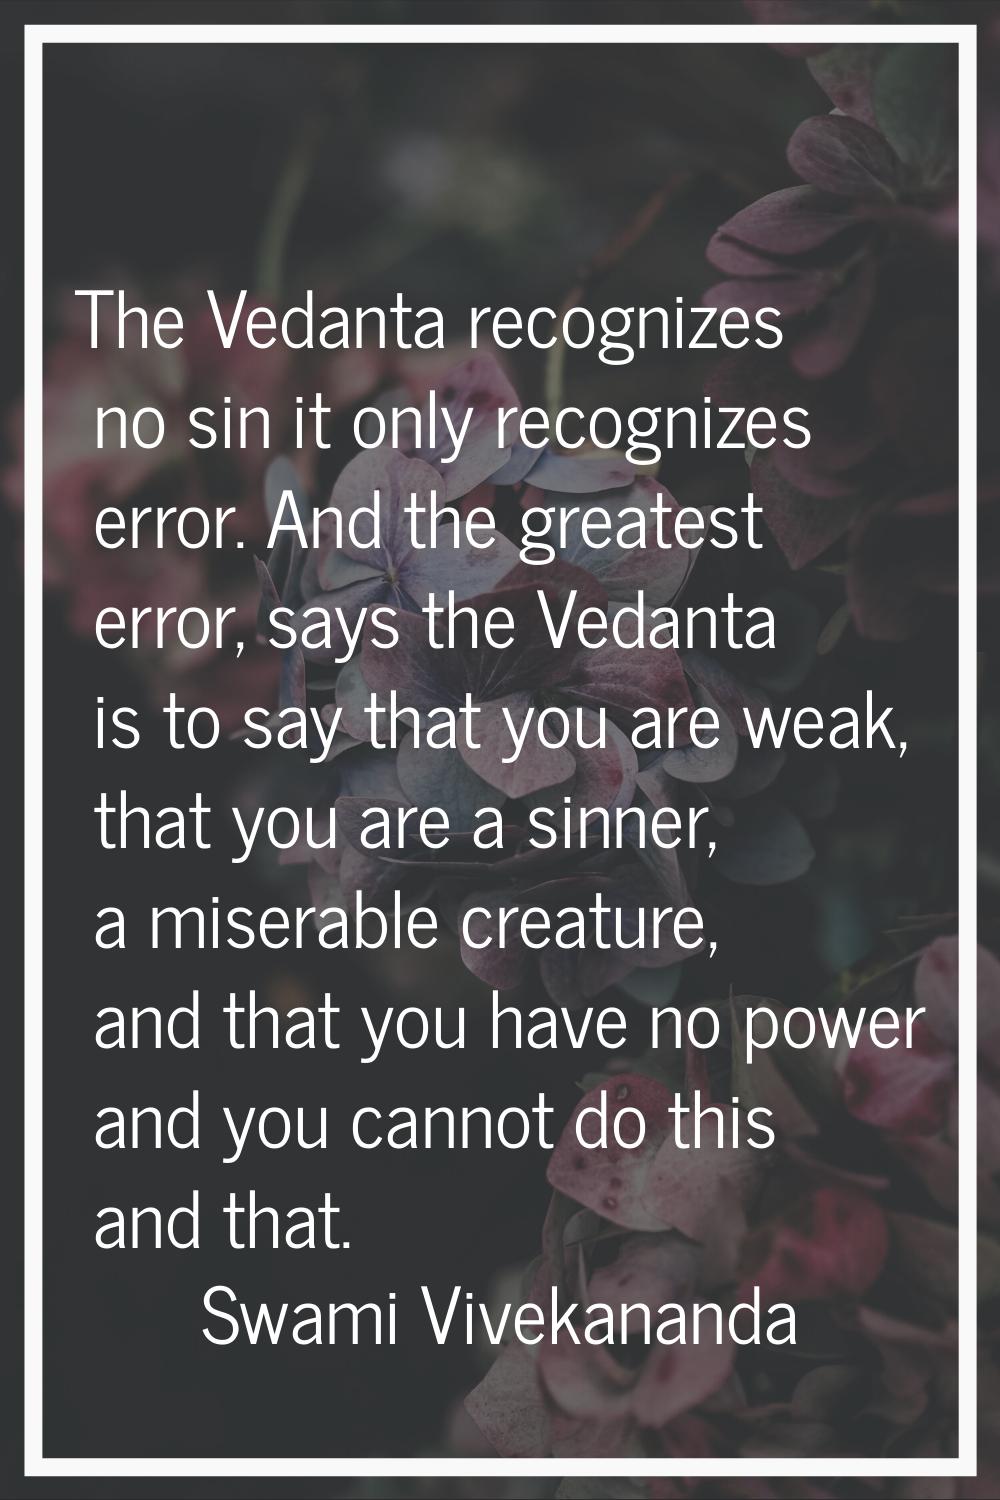 The Vedanta recognizes no sin it only recognizes error. And the greatest error, says the Vedanta is